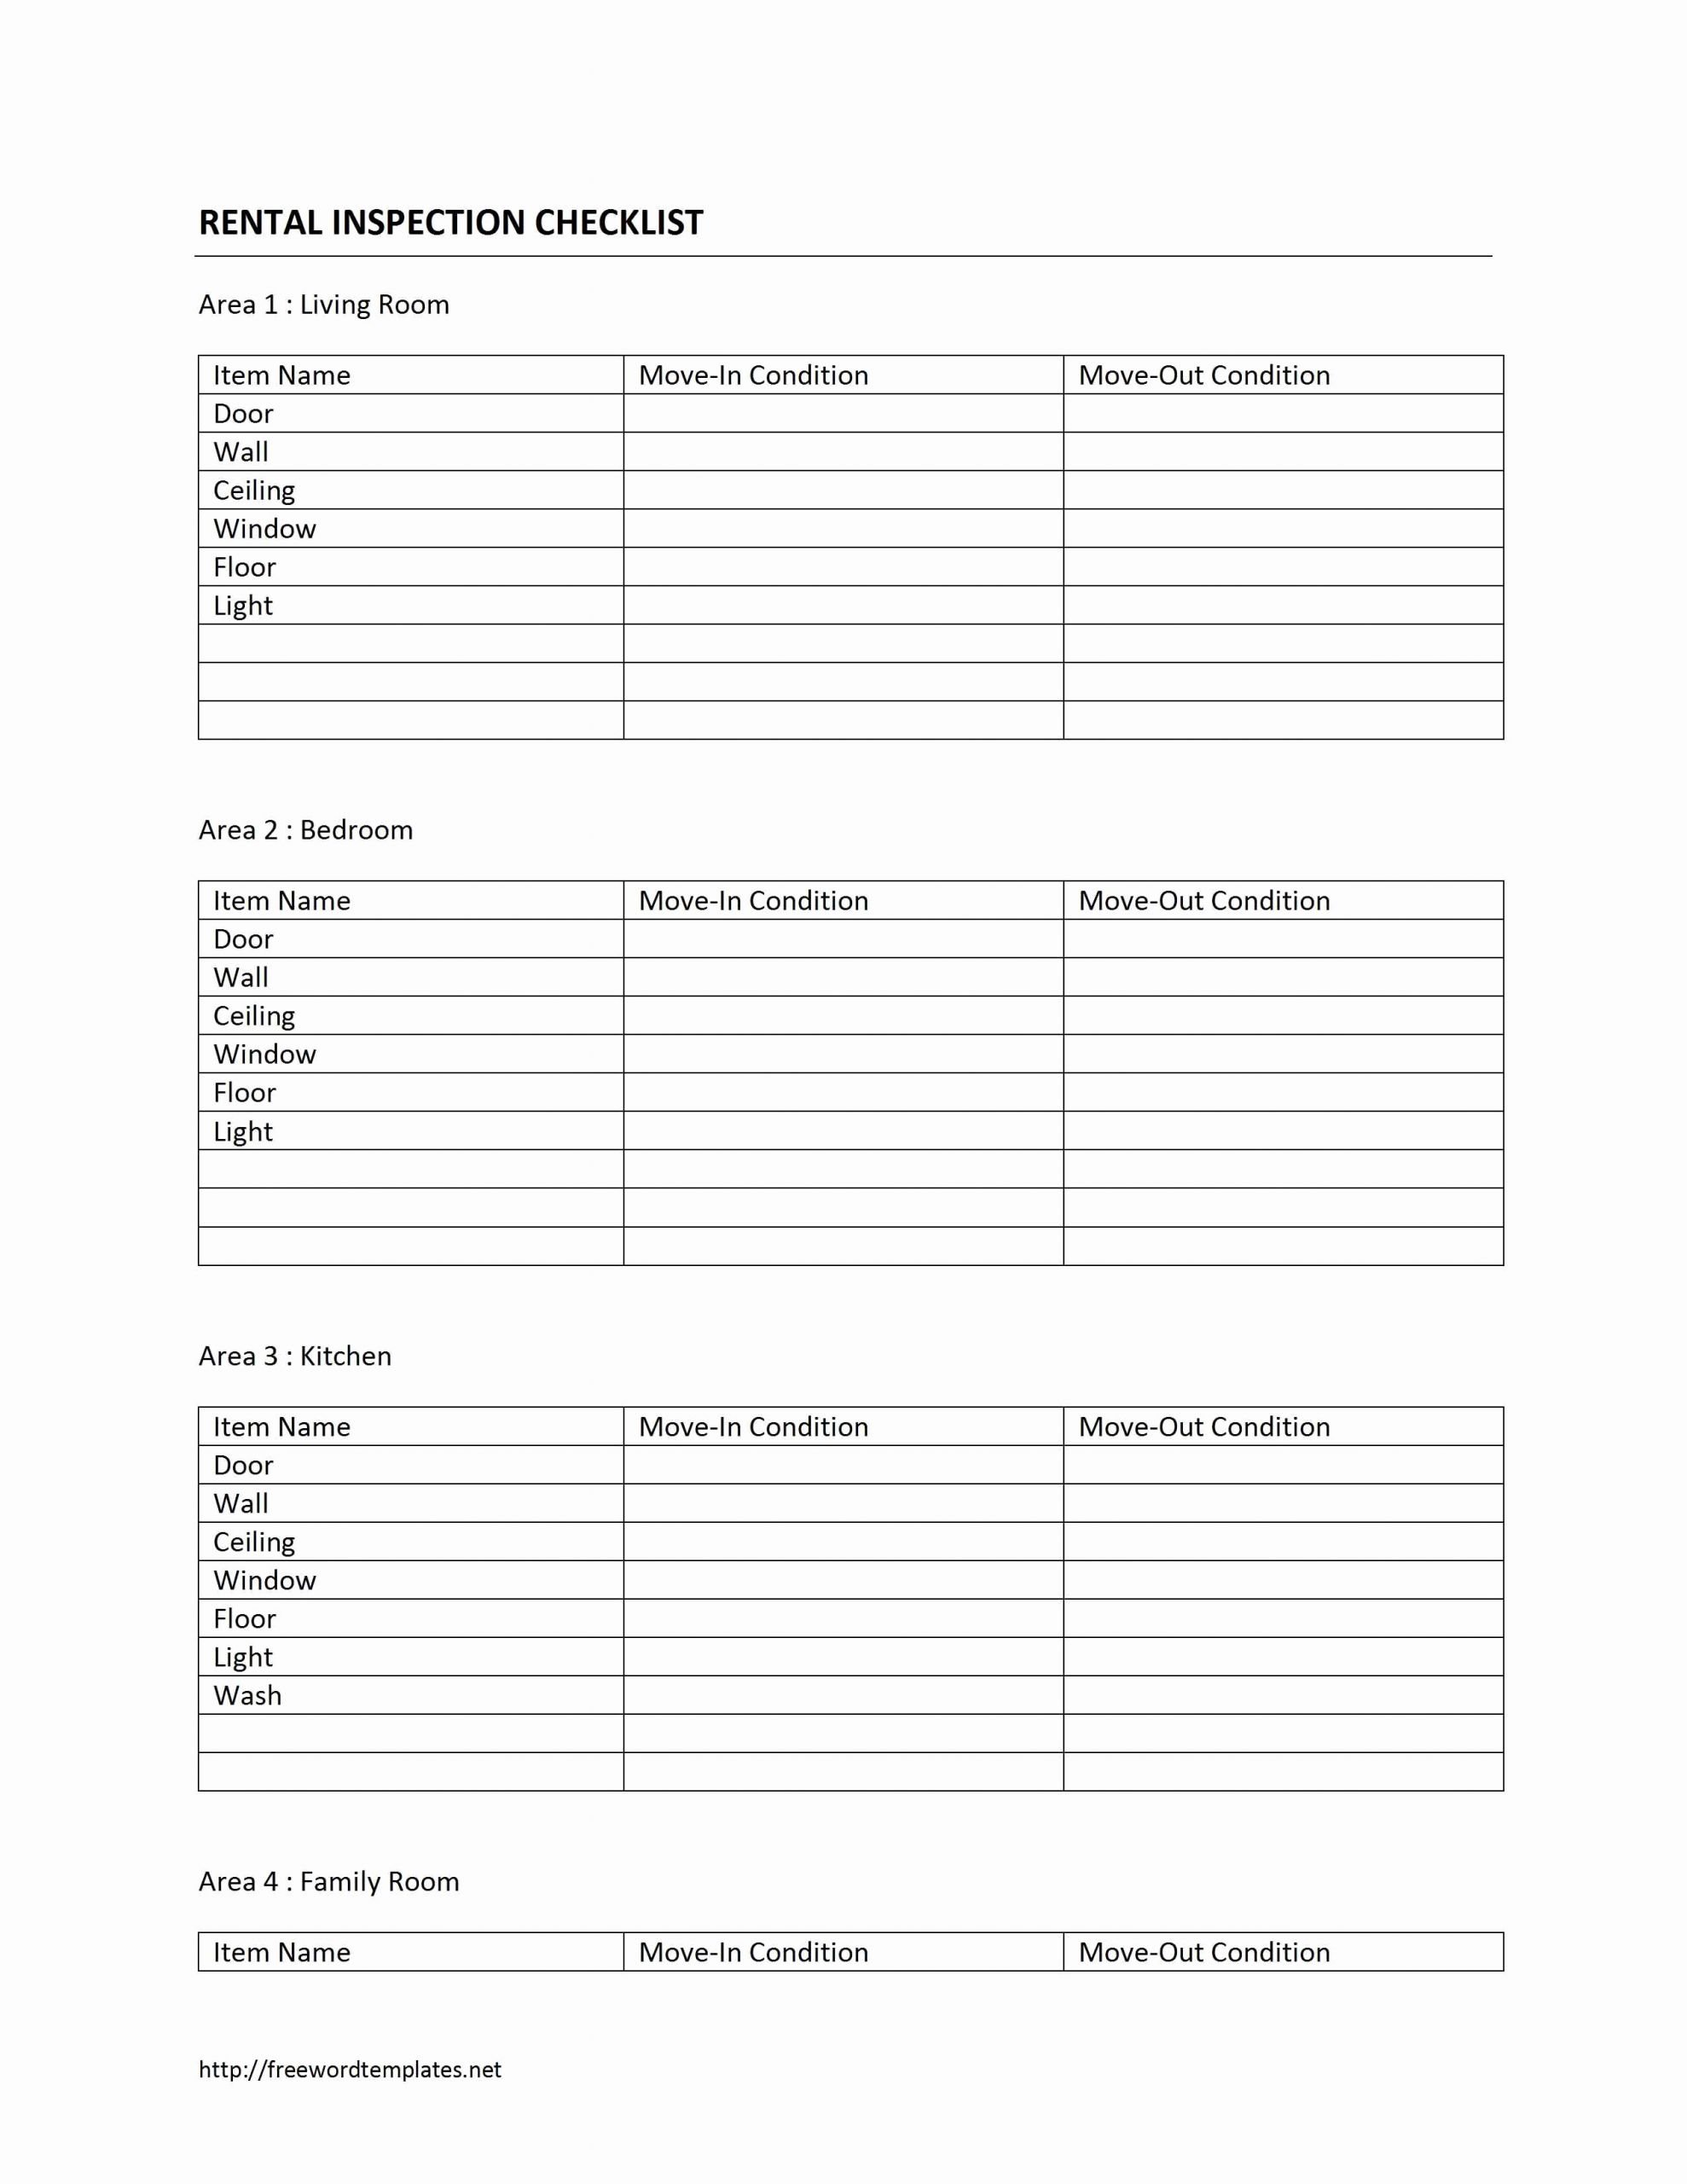 Home Inspection form Template Lovely Home Rental Inspection Checklist